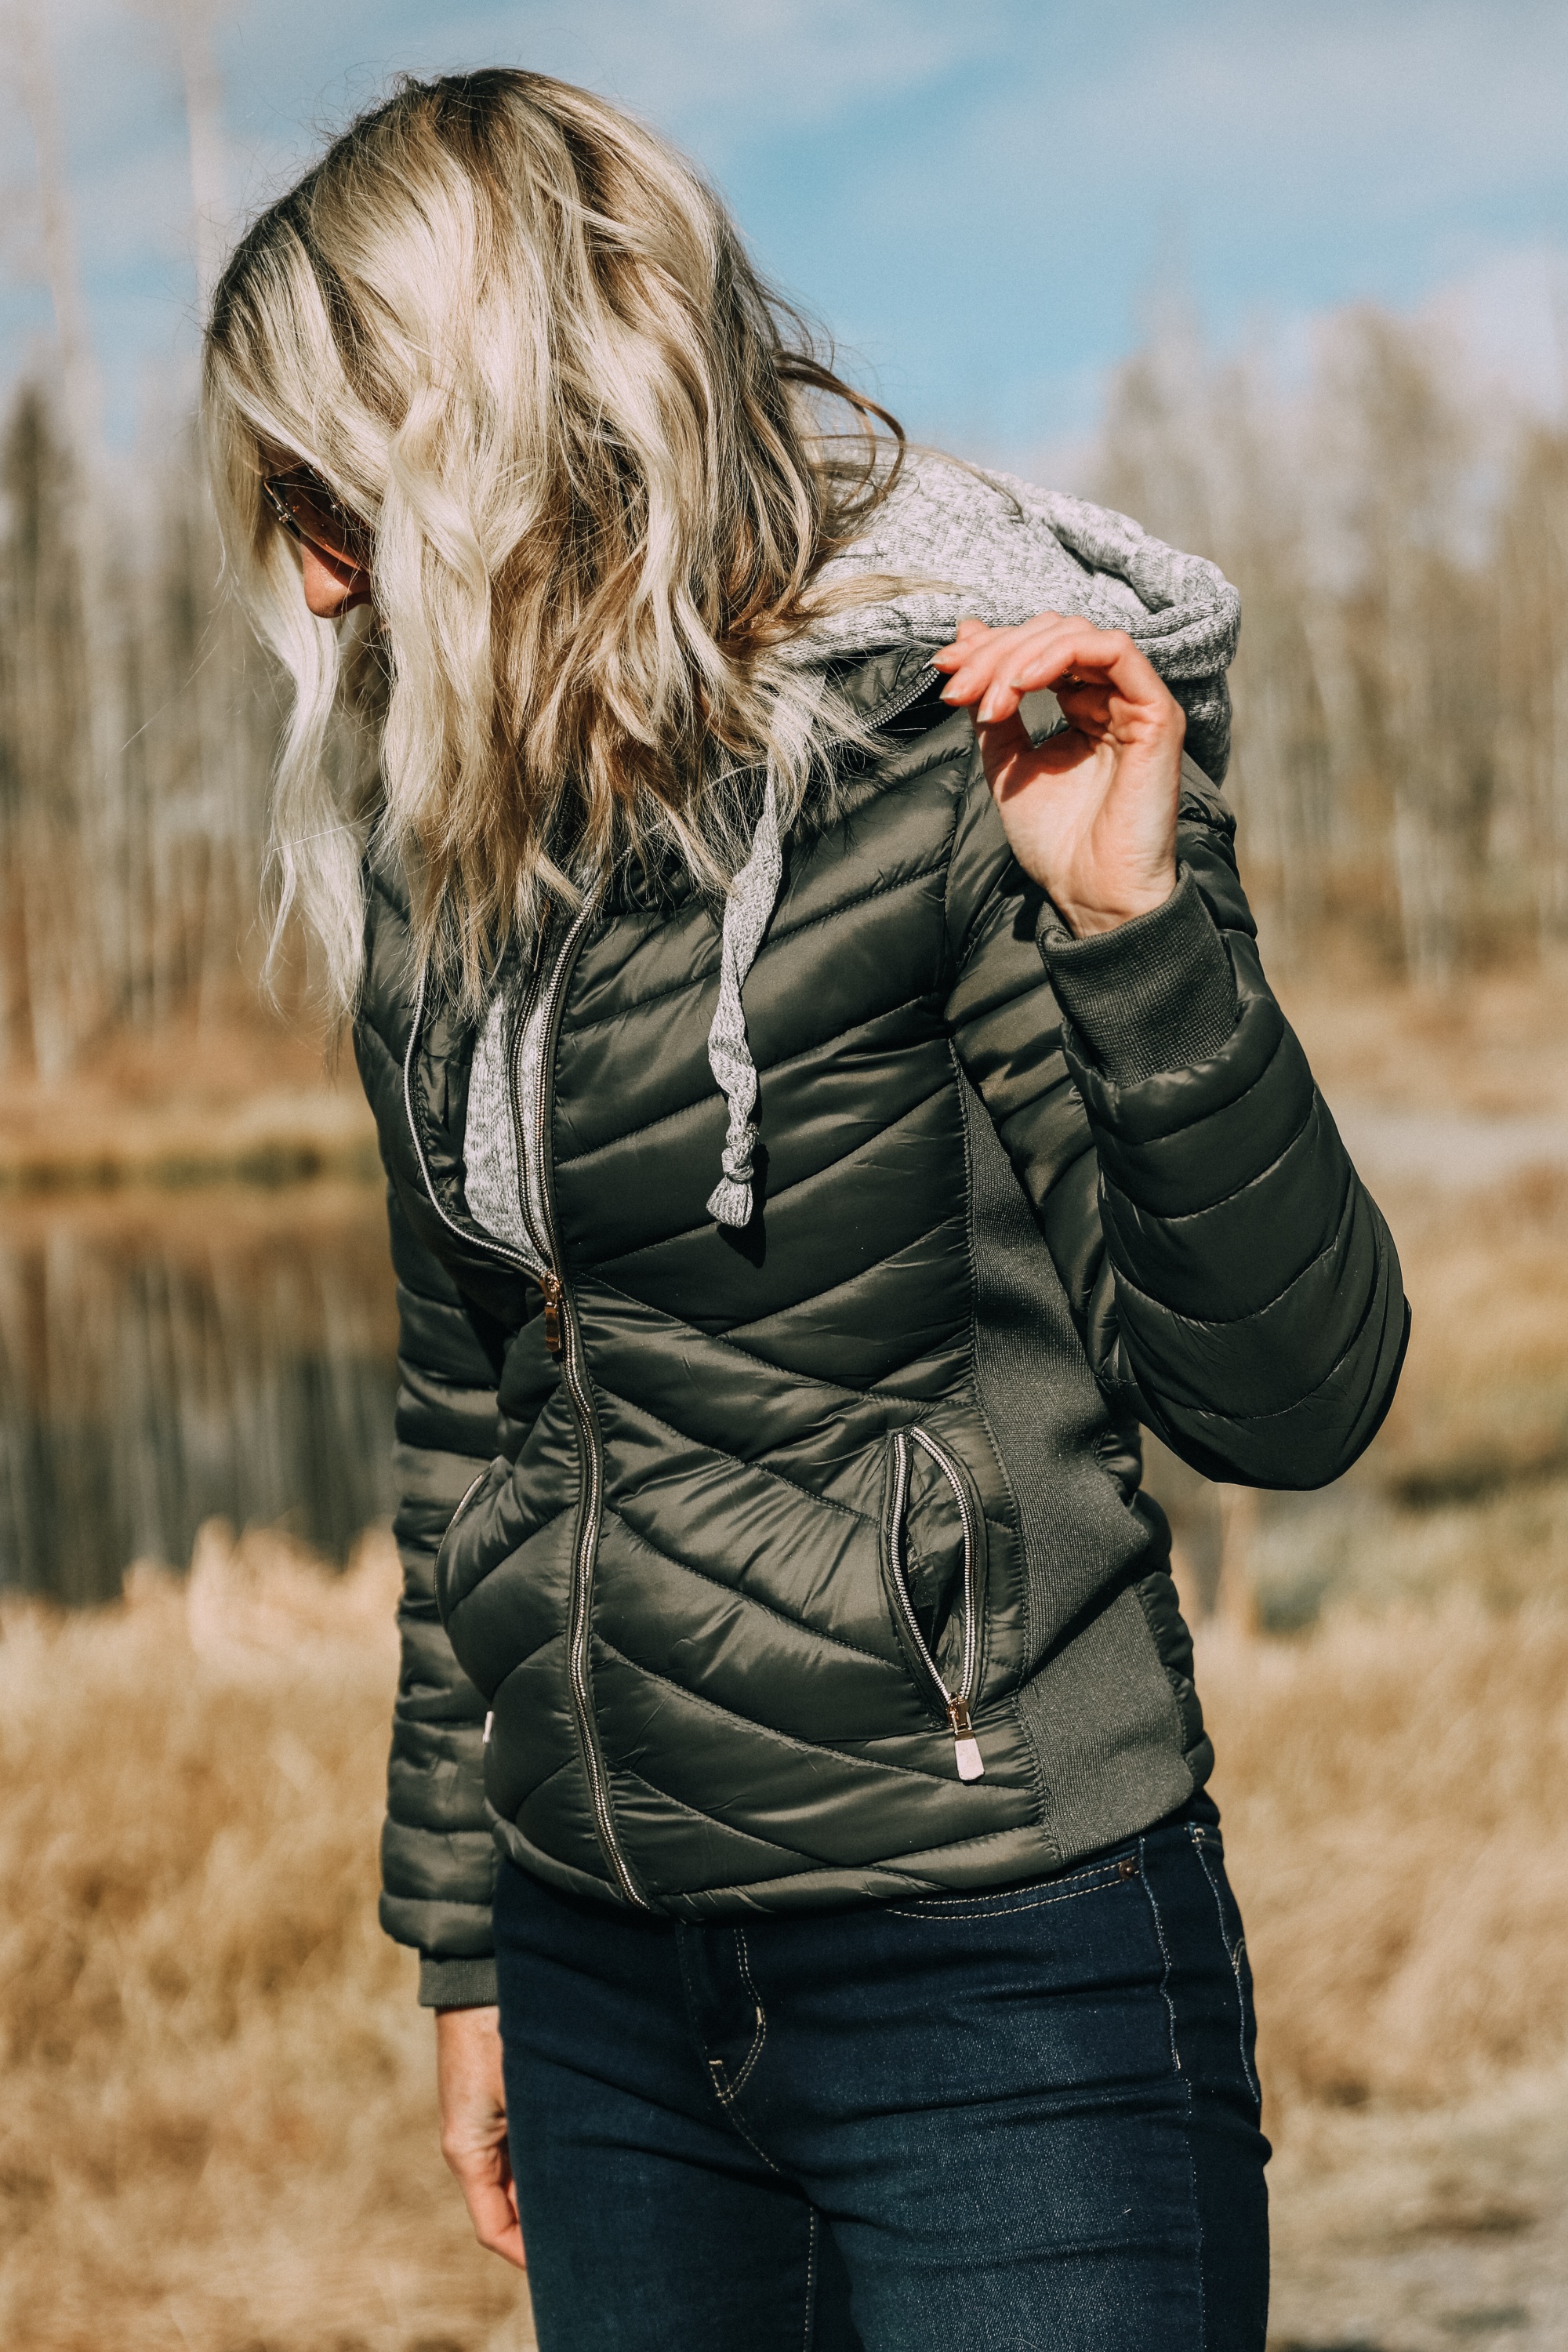 fashion blogger wearing affordable hunter green puffer jacket paired with levis skinny jeans